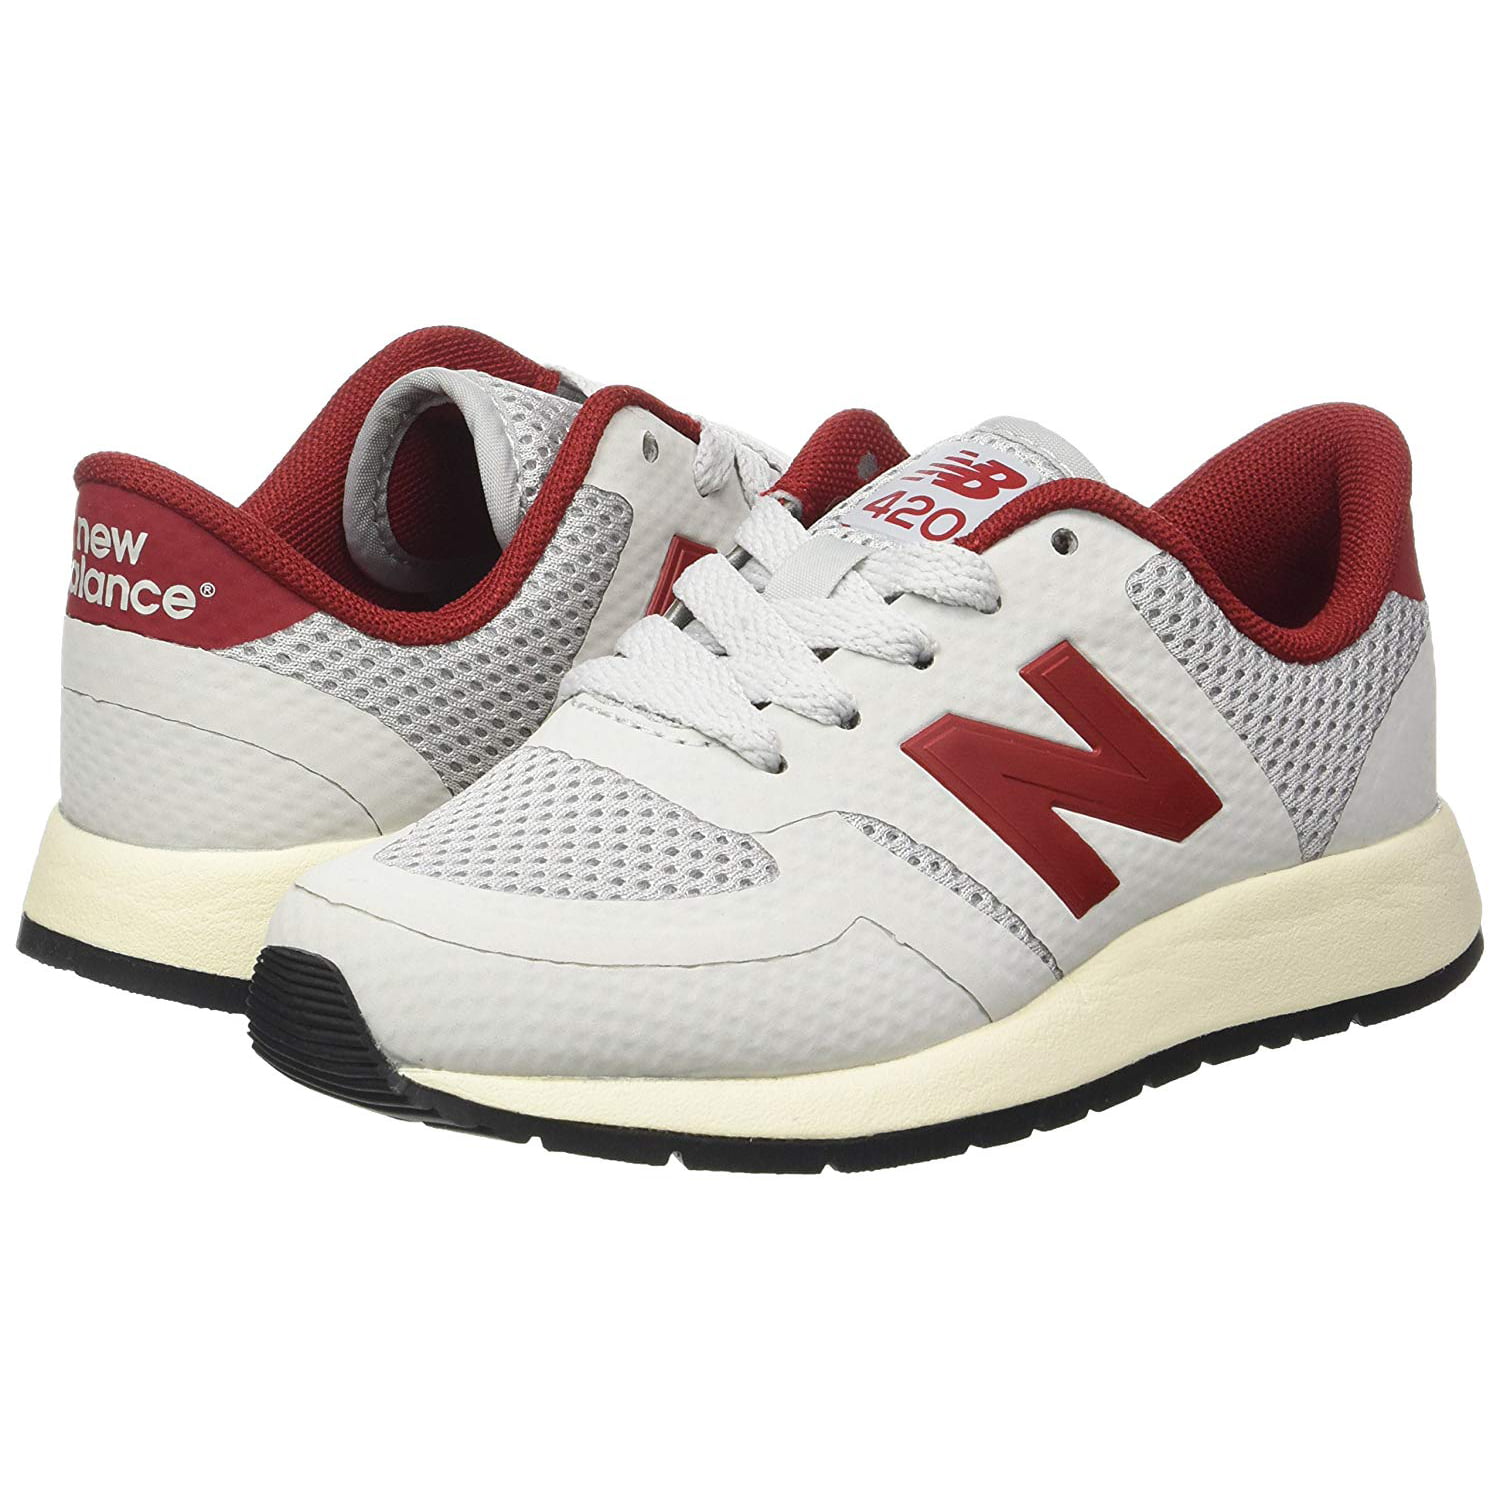 new balance 420 grey and red